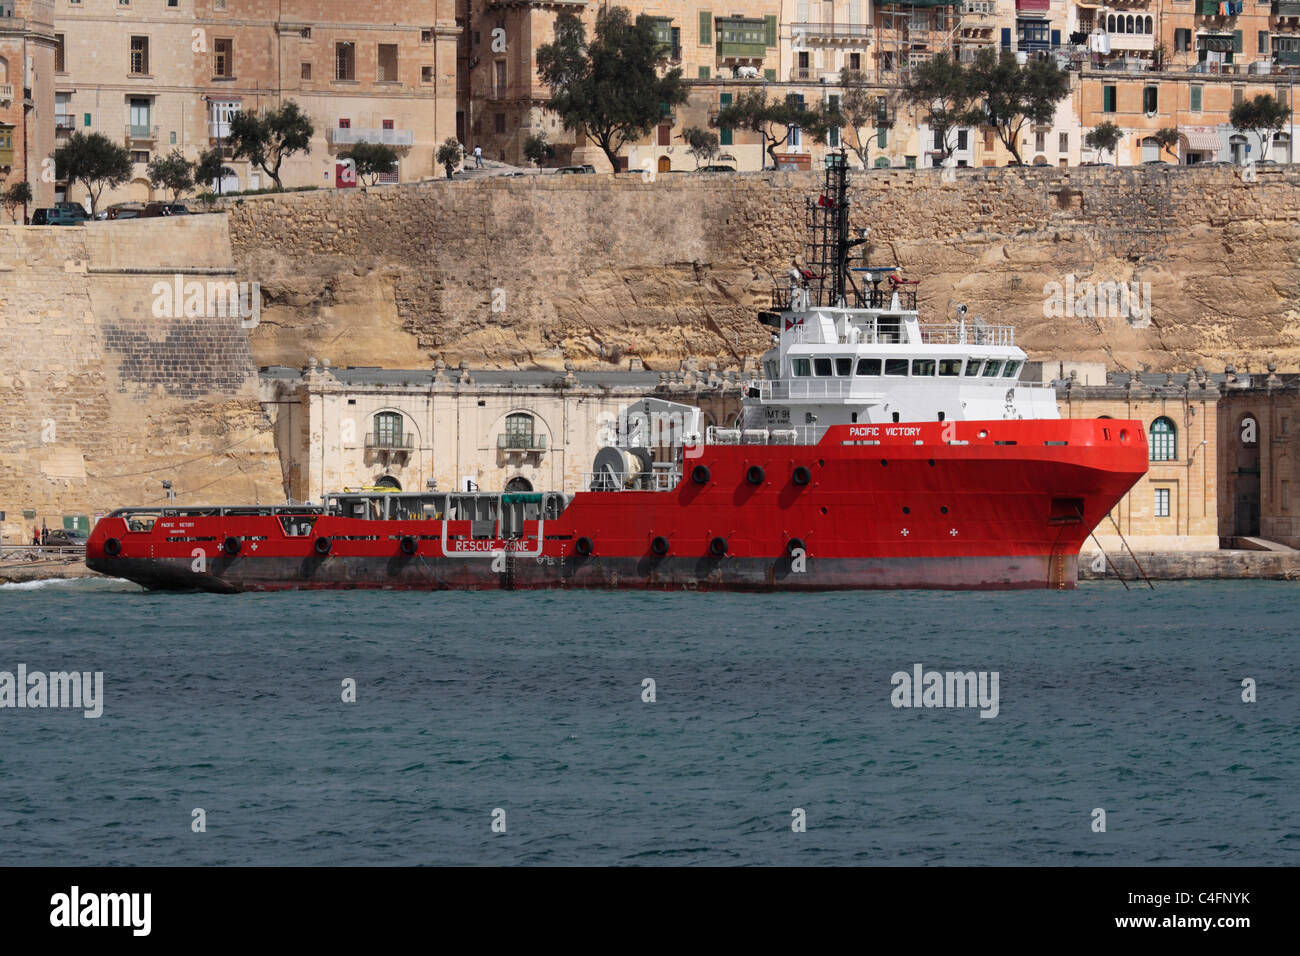 The offshore supply ship Pacific Victory in Malta's Grand Harbour Stock Photo